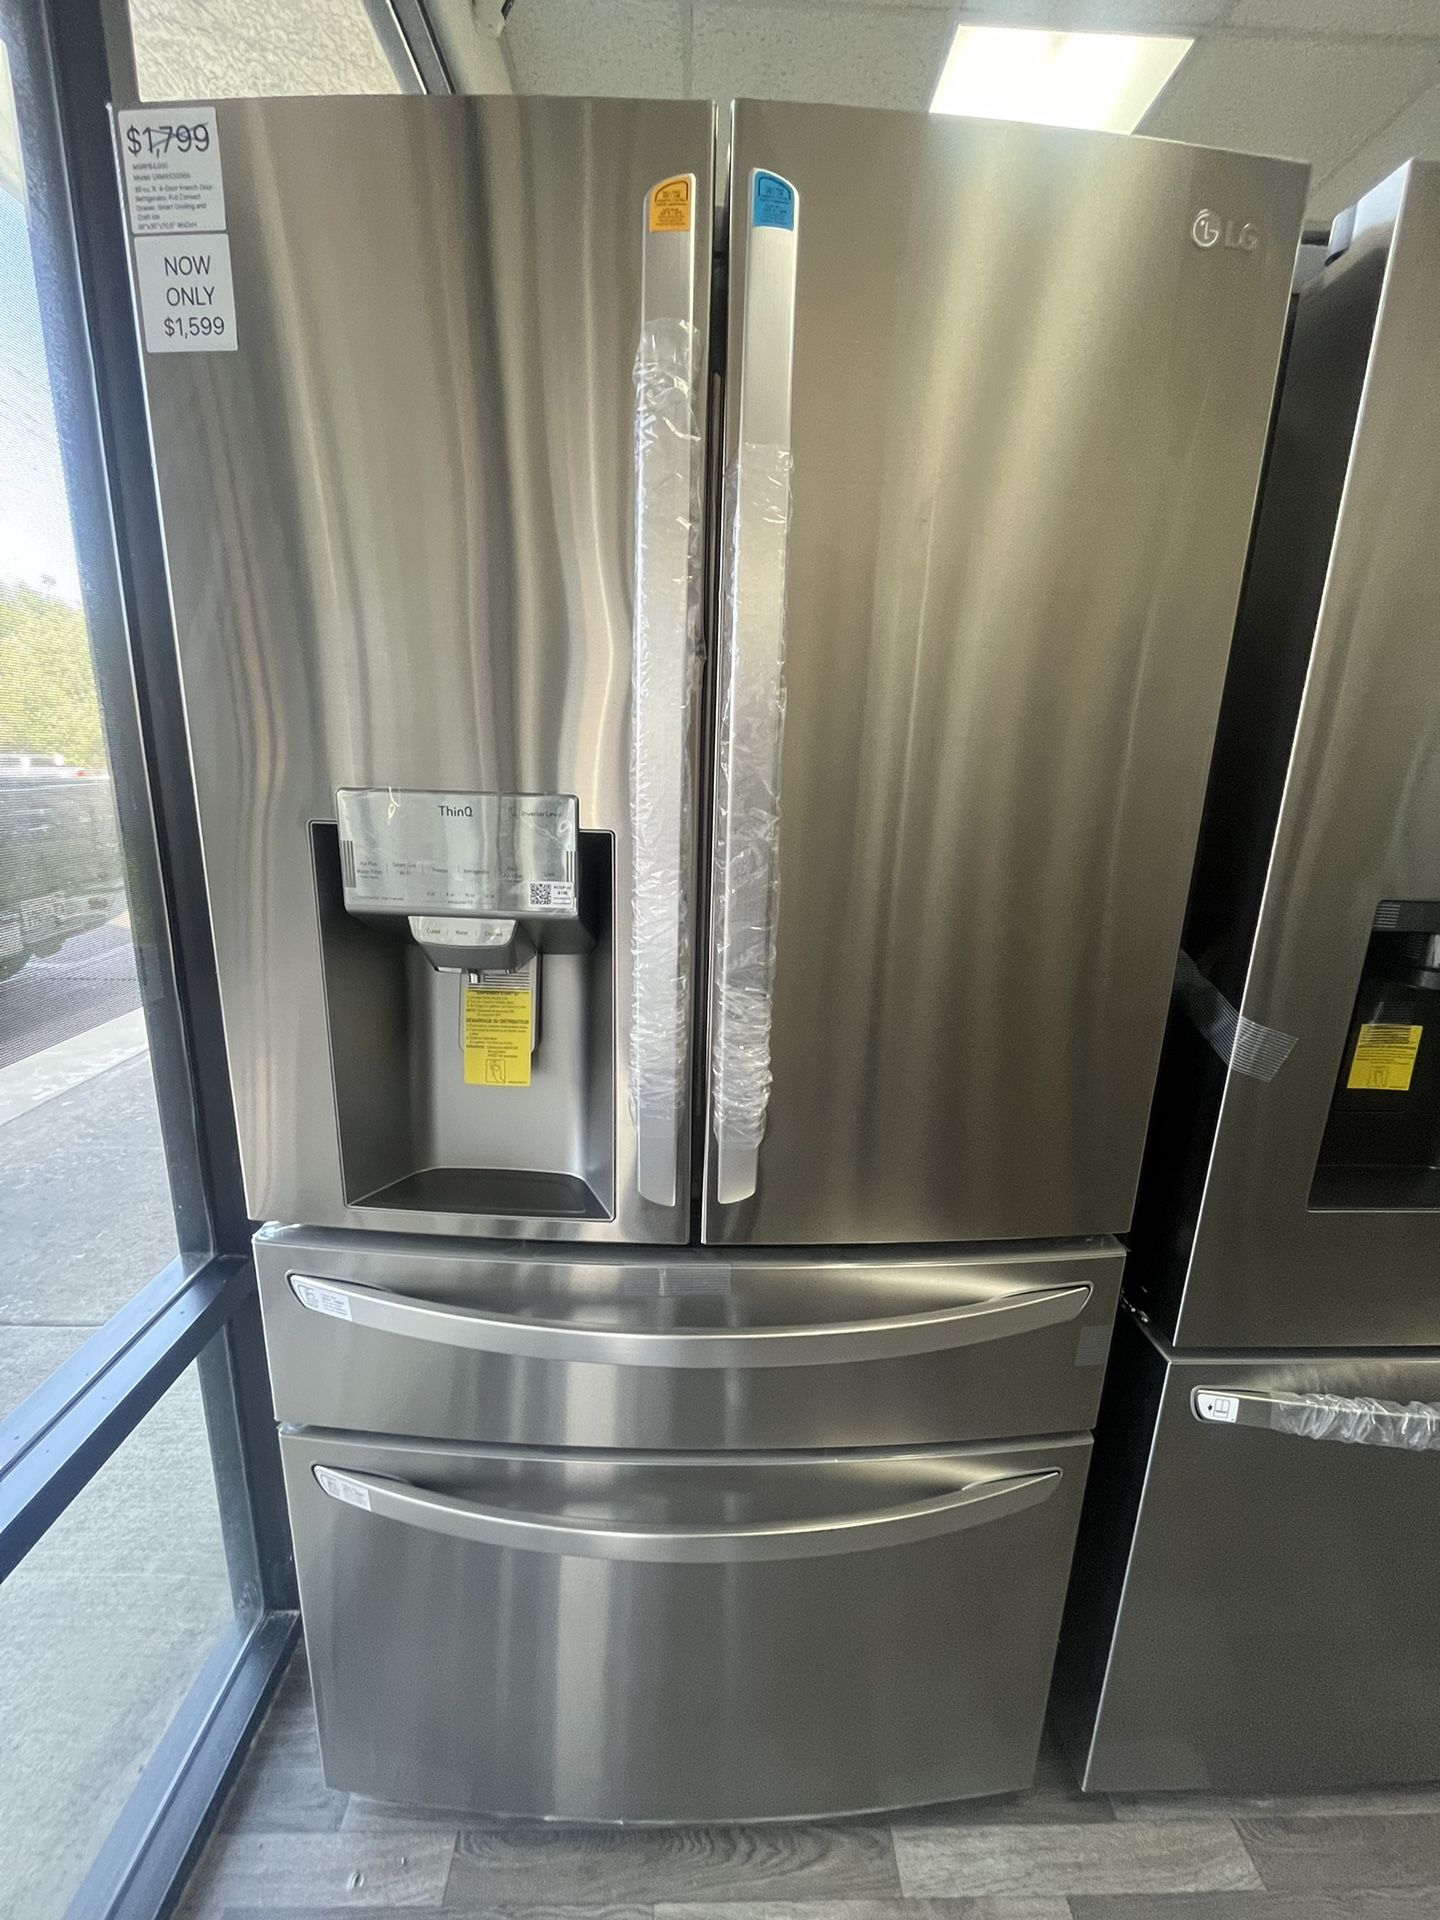 Happy Mother’s Day/ 30cu.ft Large Capacity French Door Refrigerator Now Only $1599 Was$4000